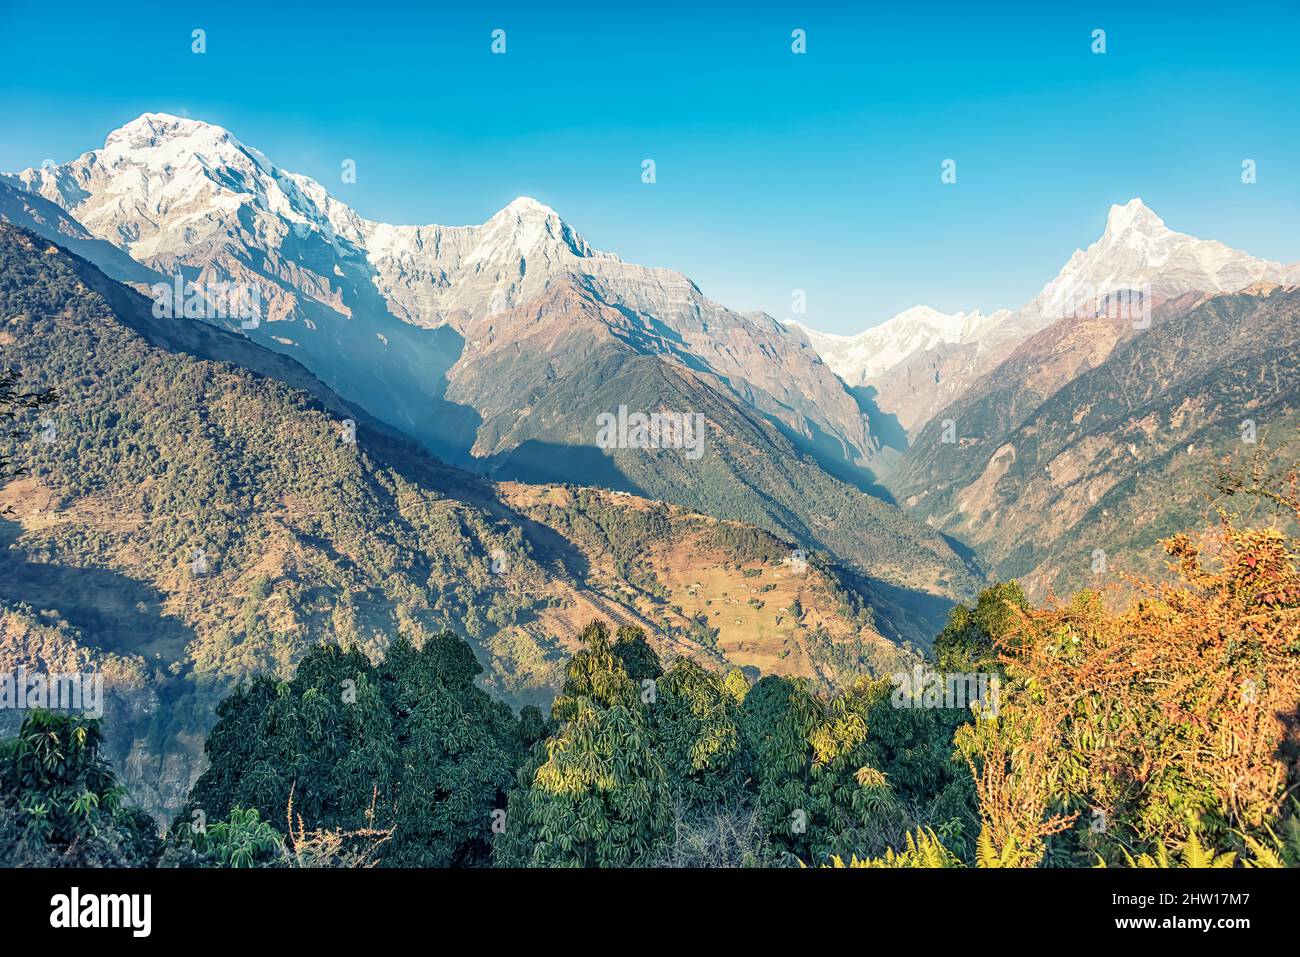 Himalayan landscape viewed from the Annapurna Conservation Area Stock Photo